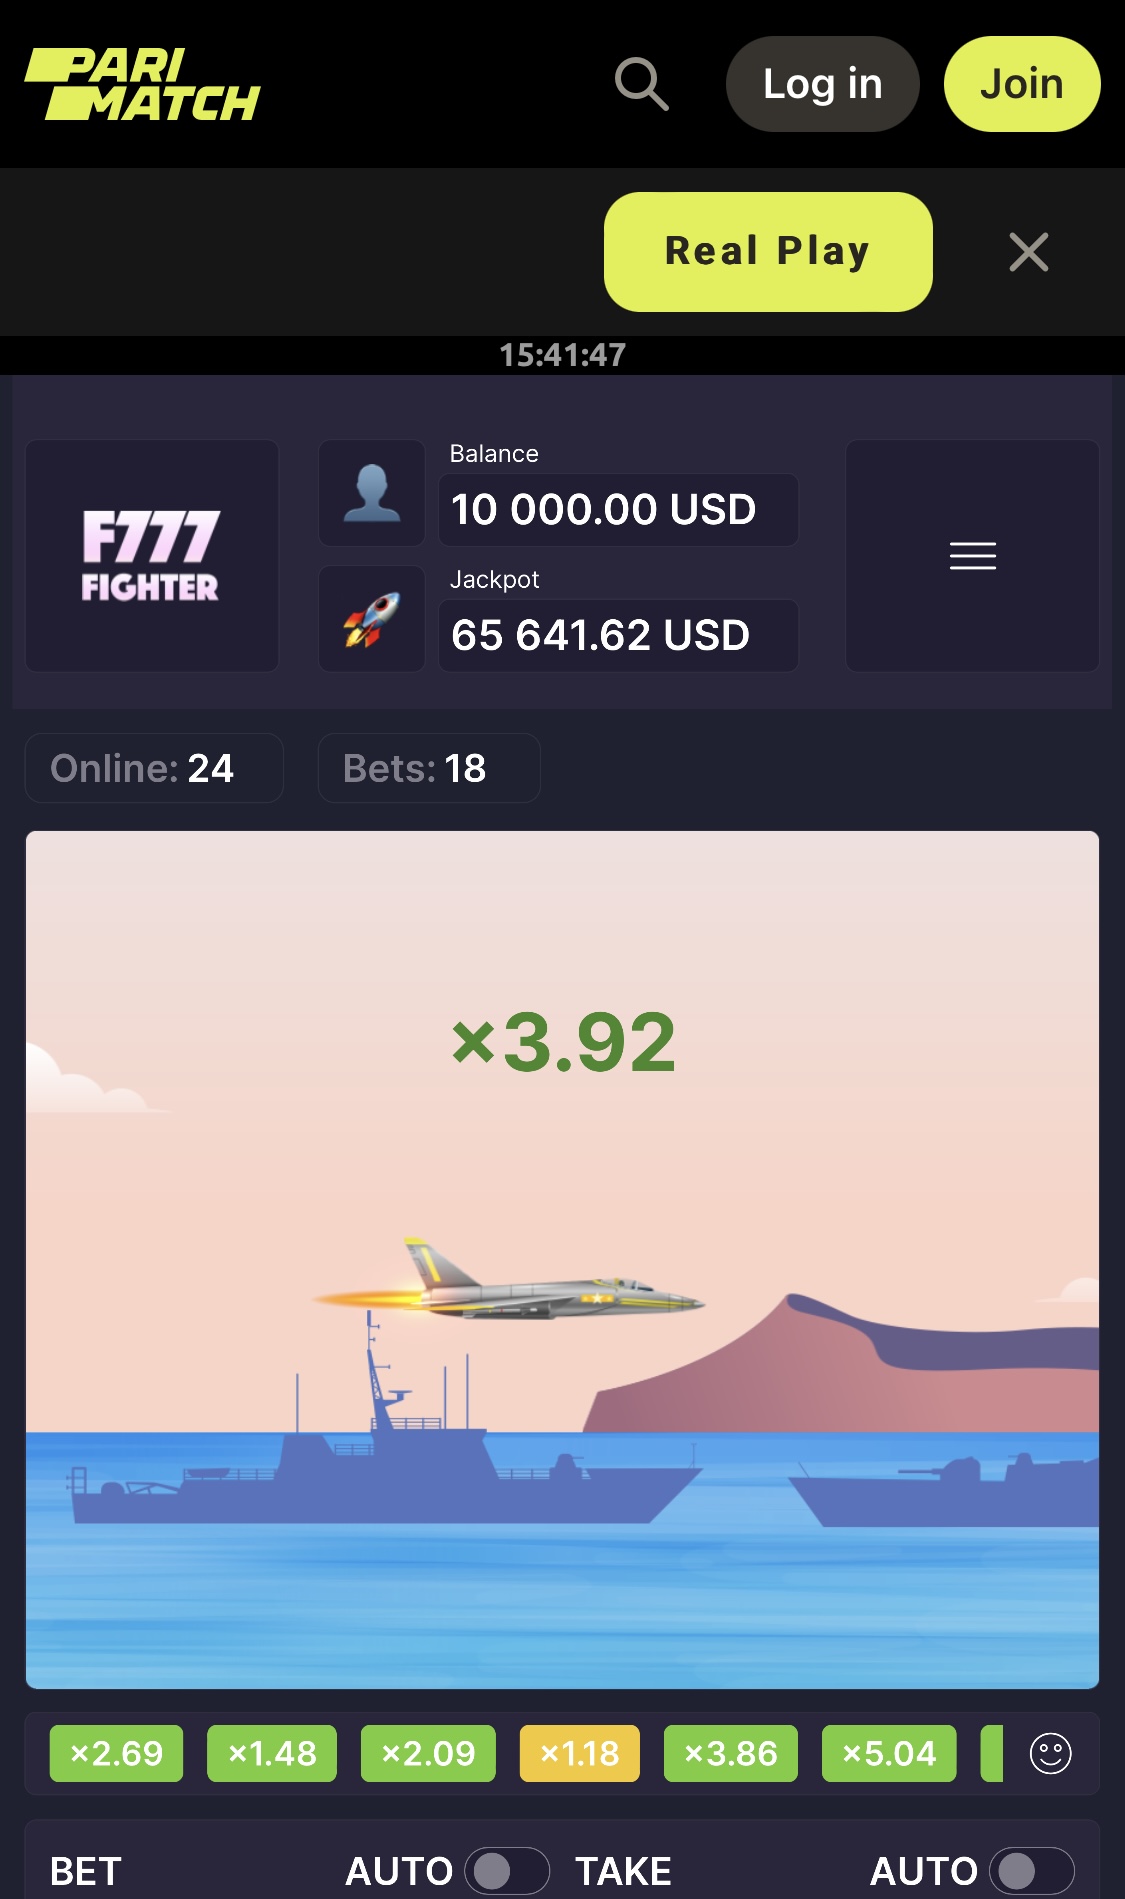 F777 Fighter instant game on Parimatch